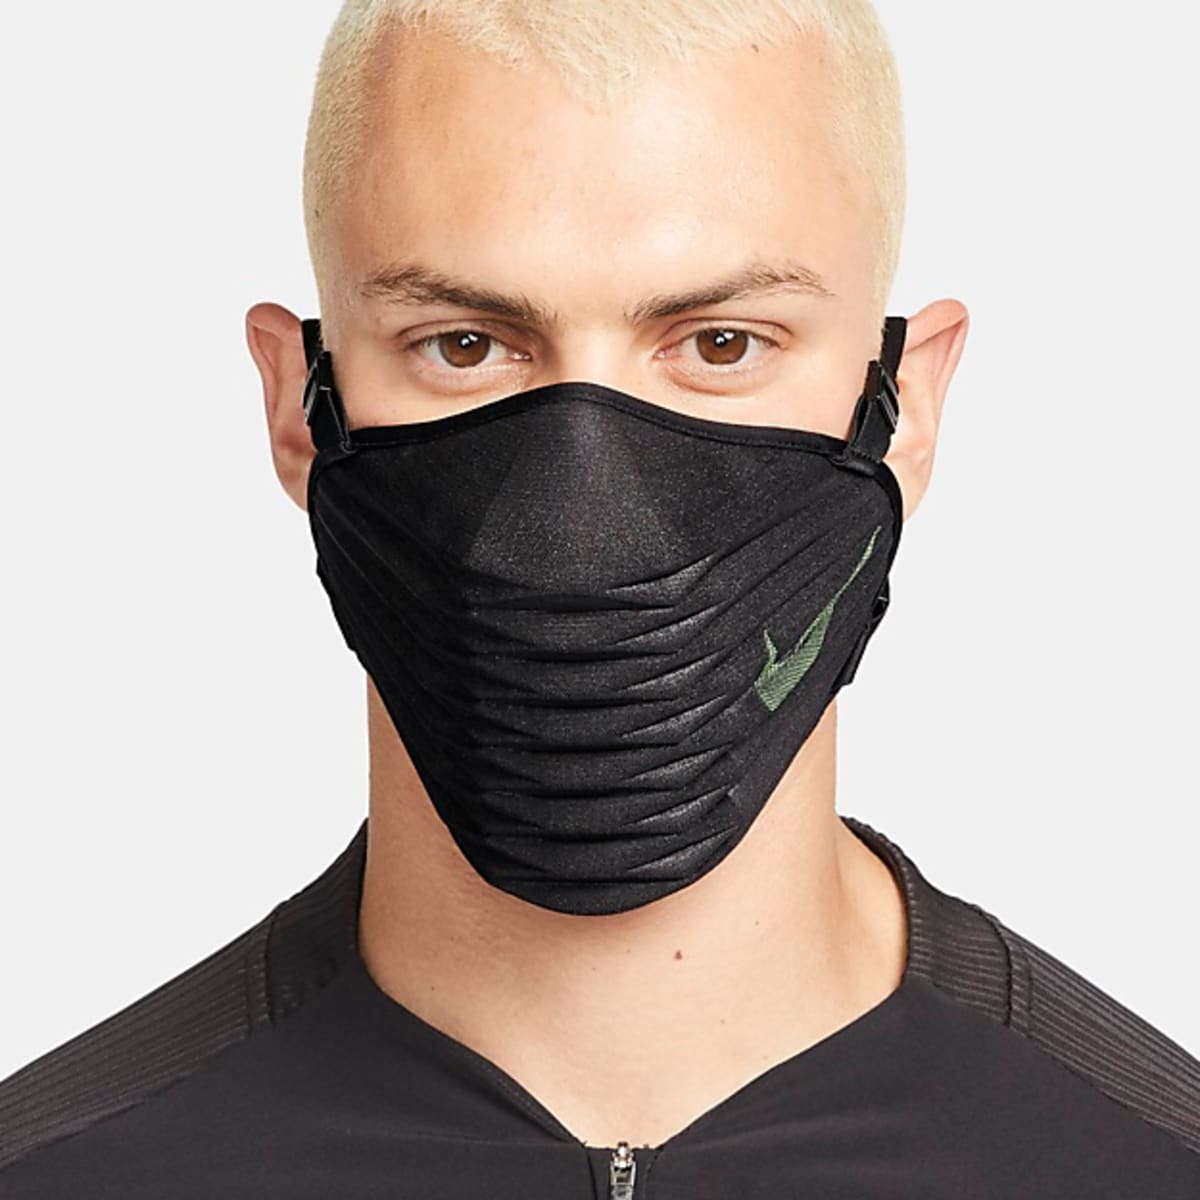 Nike releases its first performance mask, the Venturer - Acquire